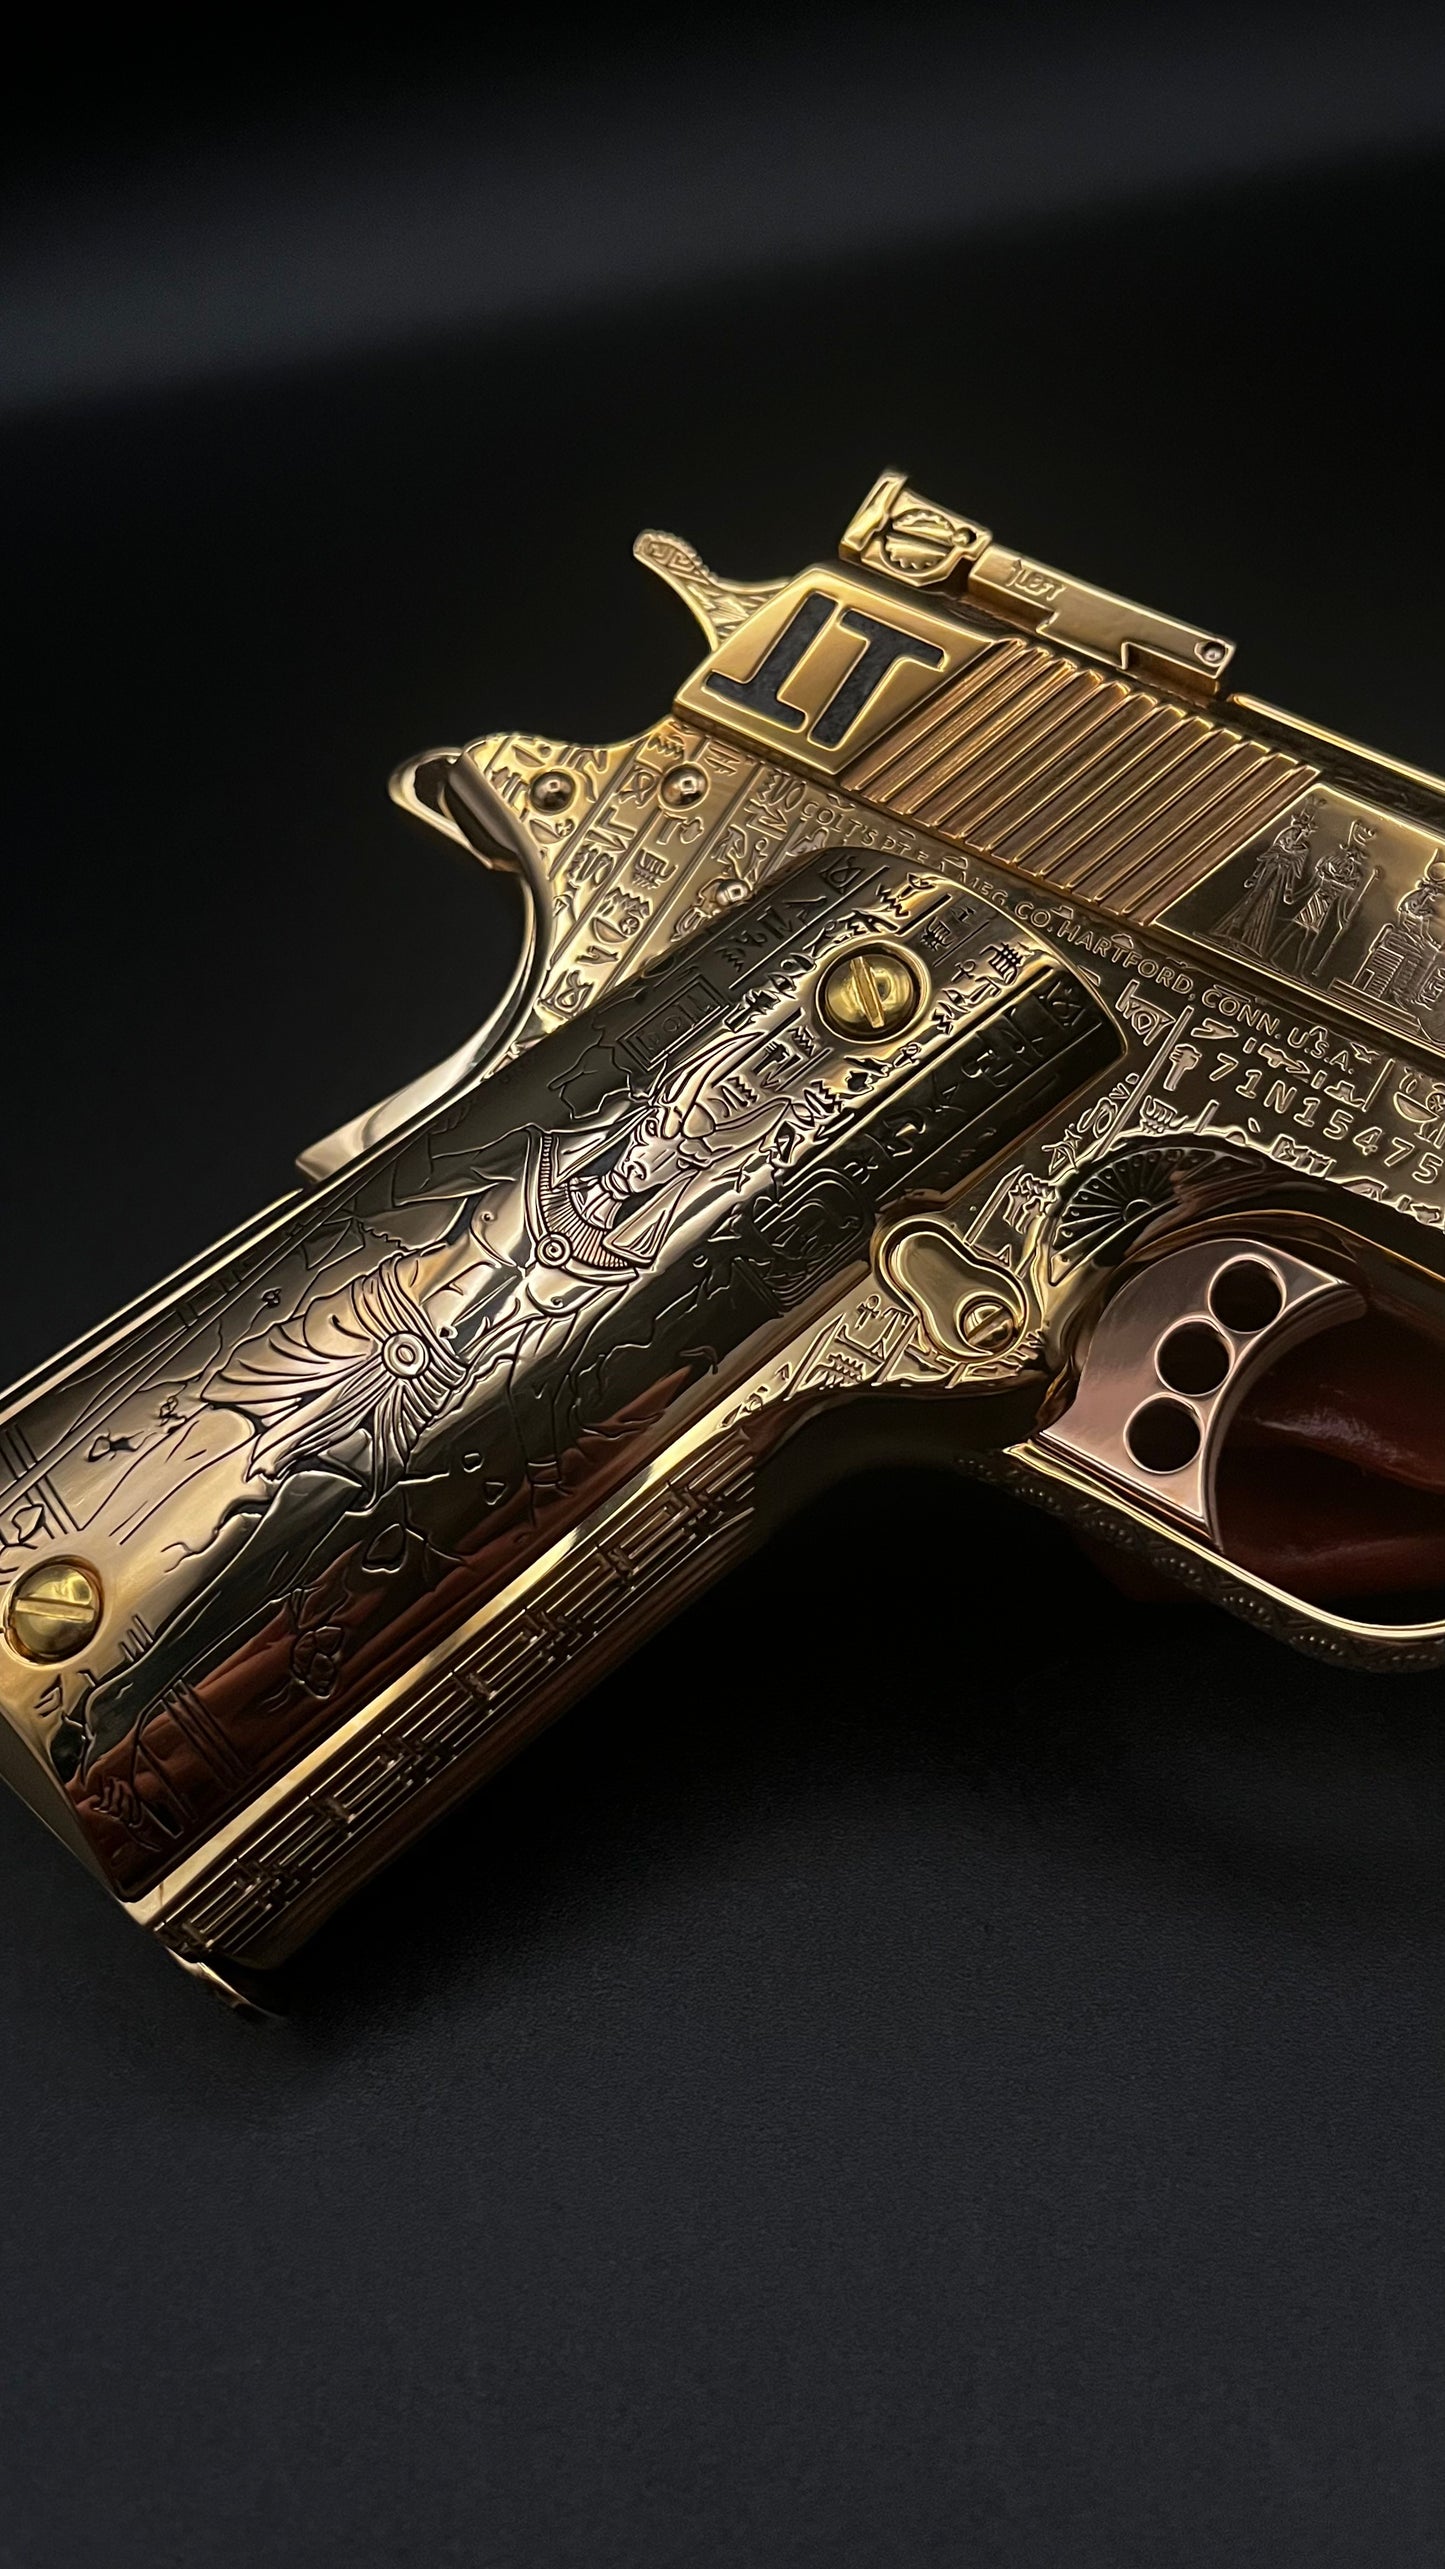 COLT CUSTOM 1911 COMP’D LIMITED EDITION “ANUBIS” 24k GOLD IN A BEAUTY DISPLAY MAGNETIC BOX